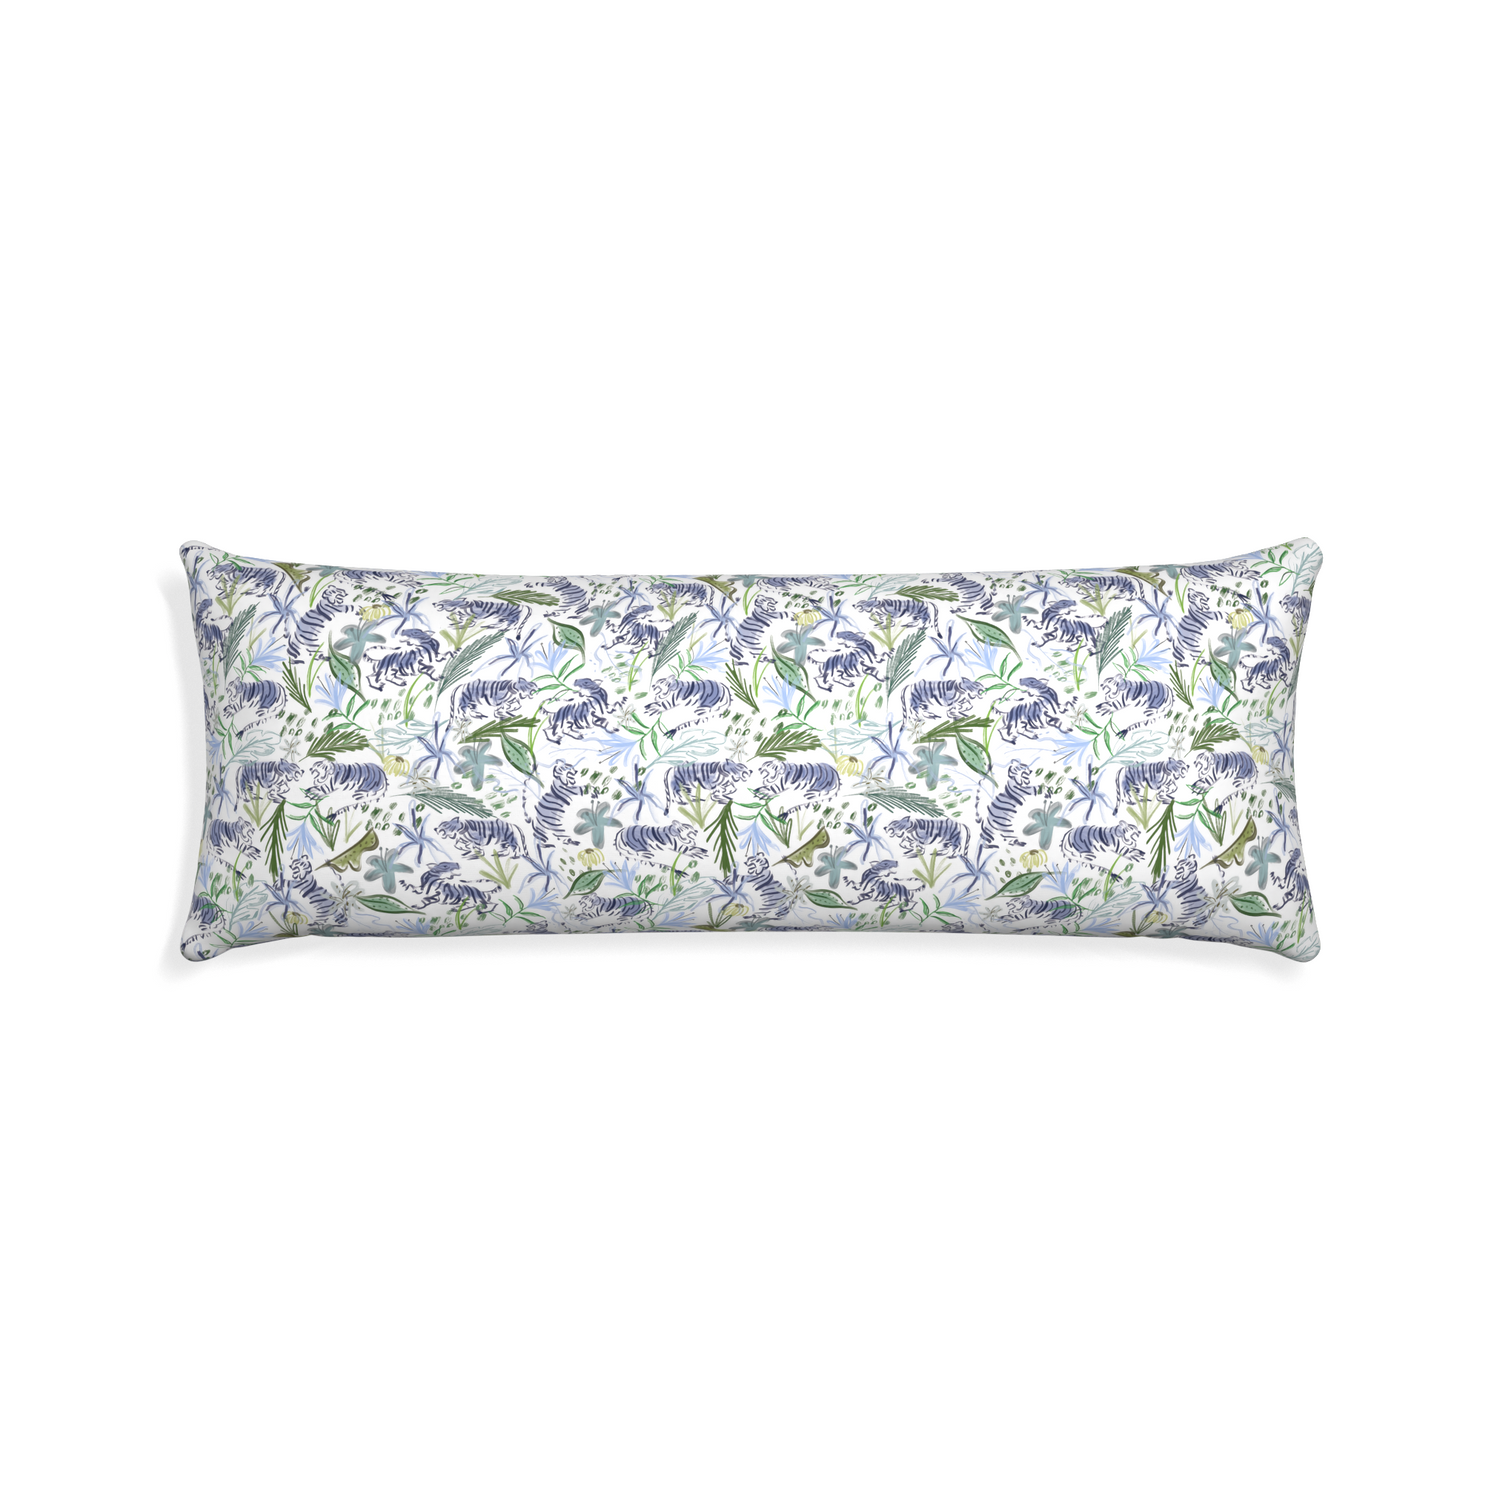 Xl-lumbar frida green custom green tigerpillow with none on white background